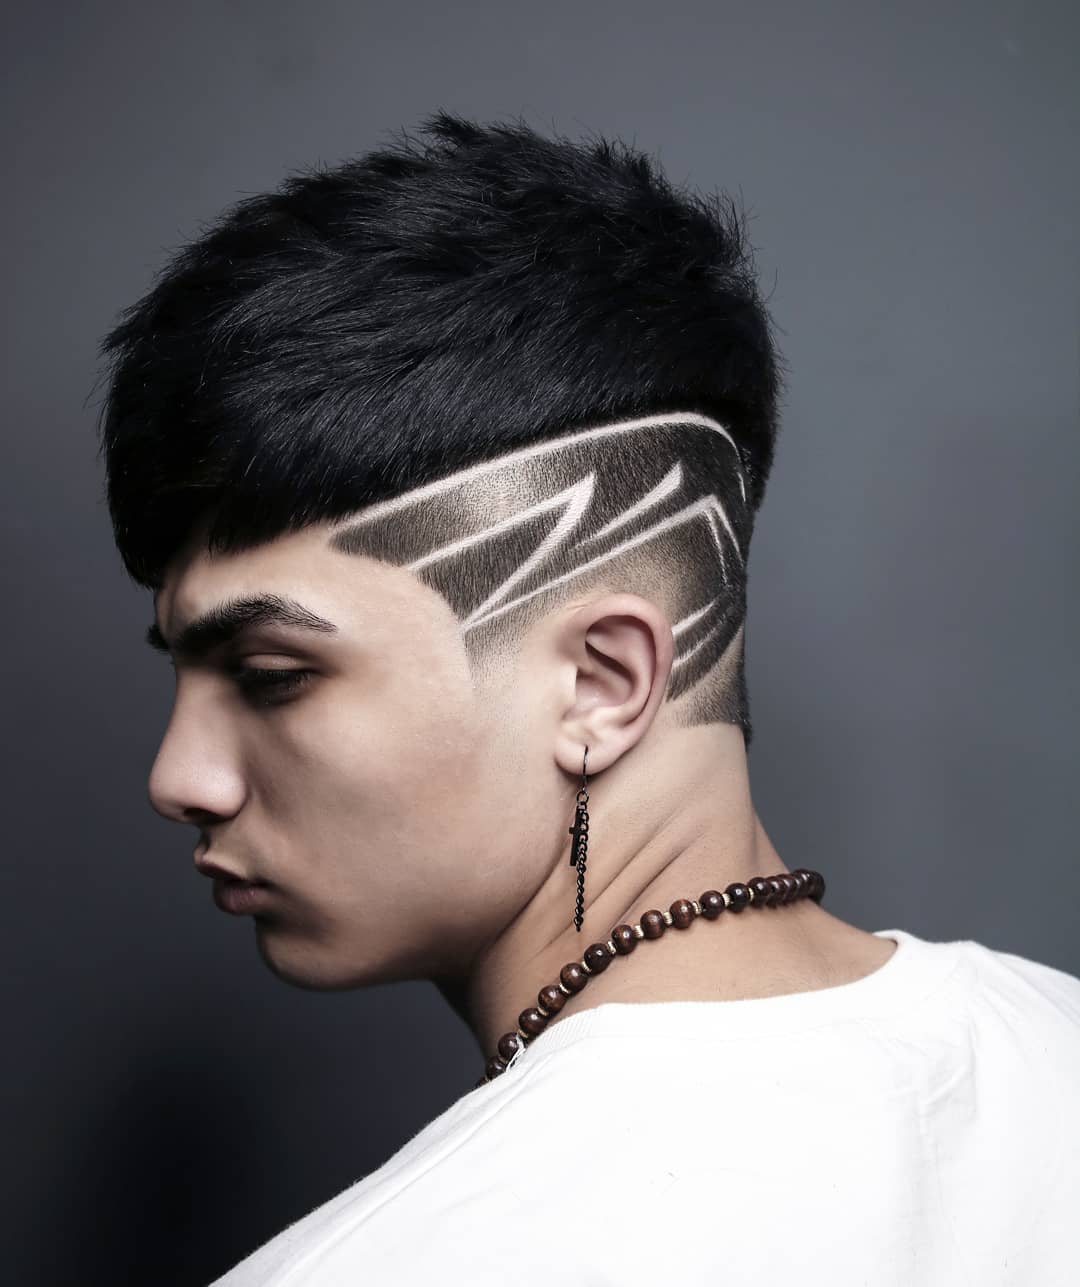 Undercut Designs For Men To Try In 2019 - Mens Hairstyle 2020